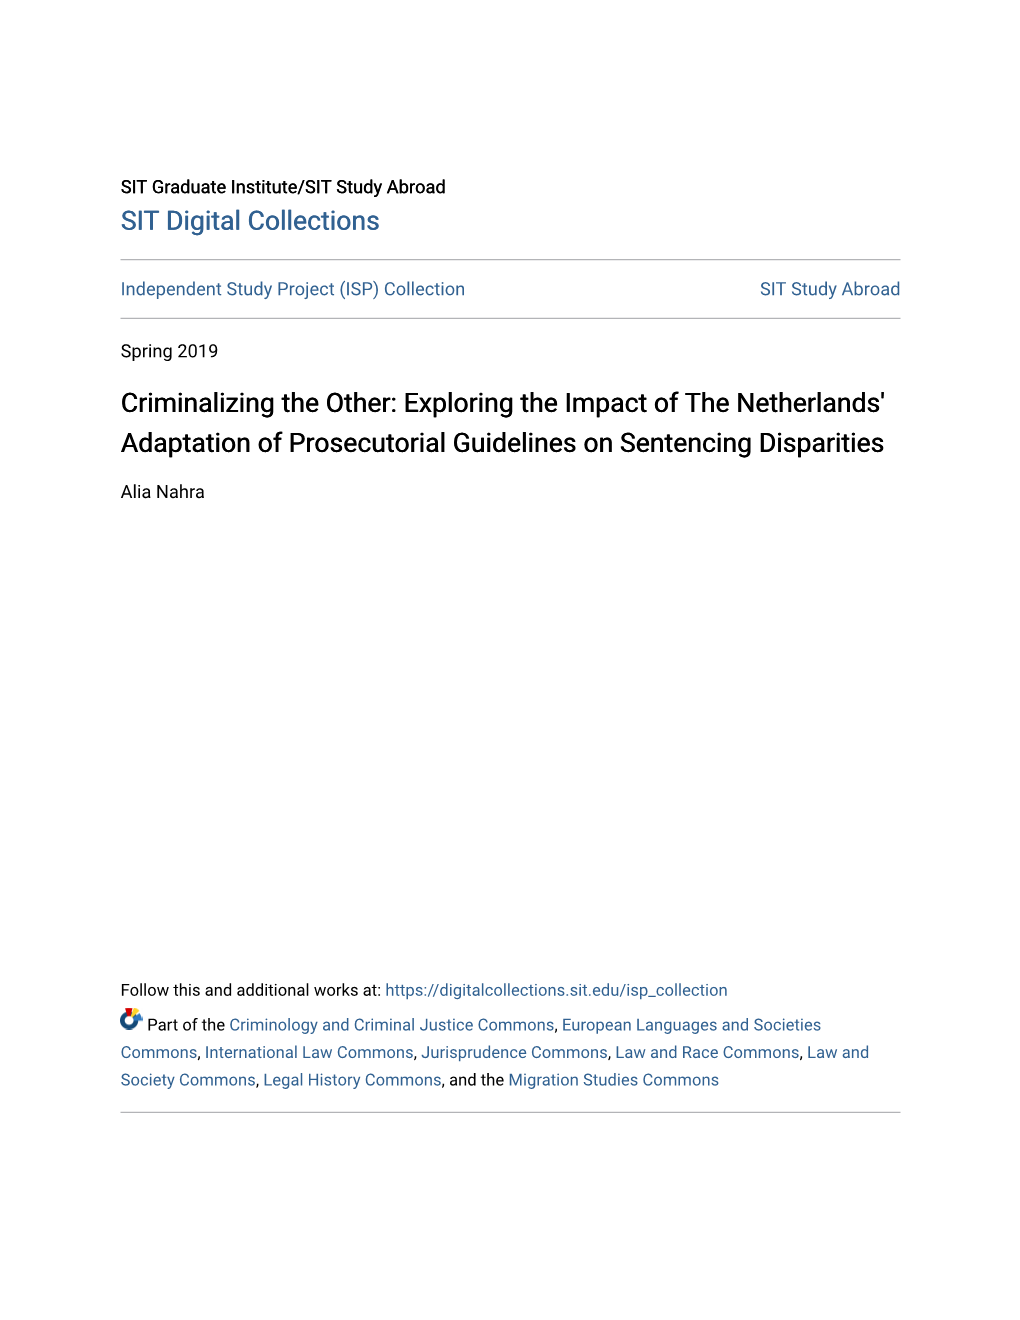 Criminalizing the Other: Exploring the Impact of the Netherlands' Adaptation of Prosecutorial Guidelines on Sentencing Disparities